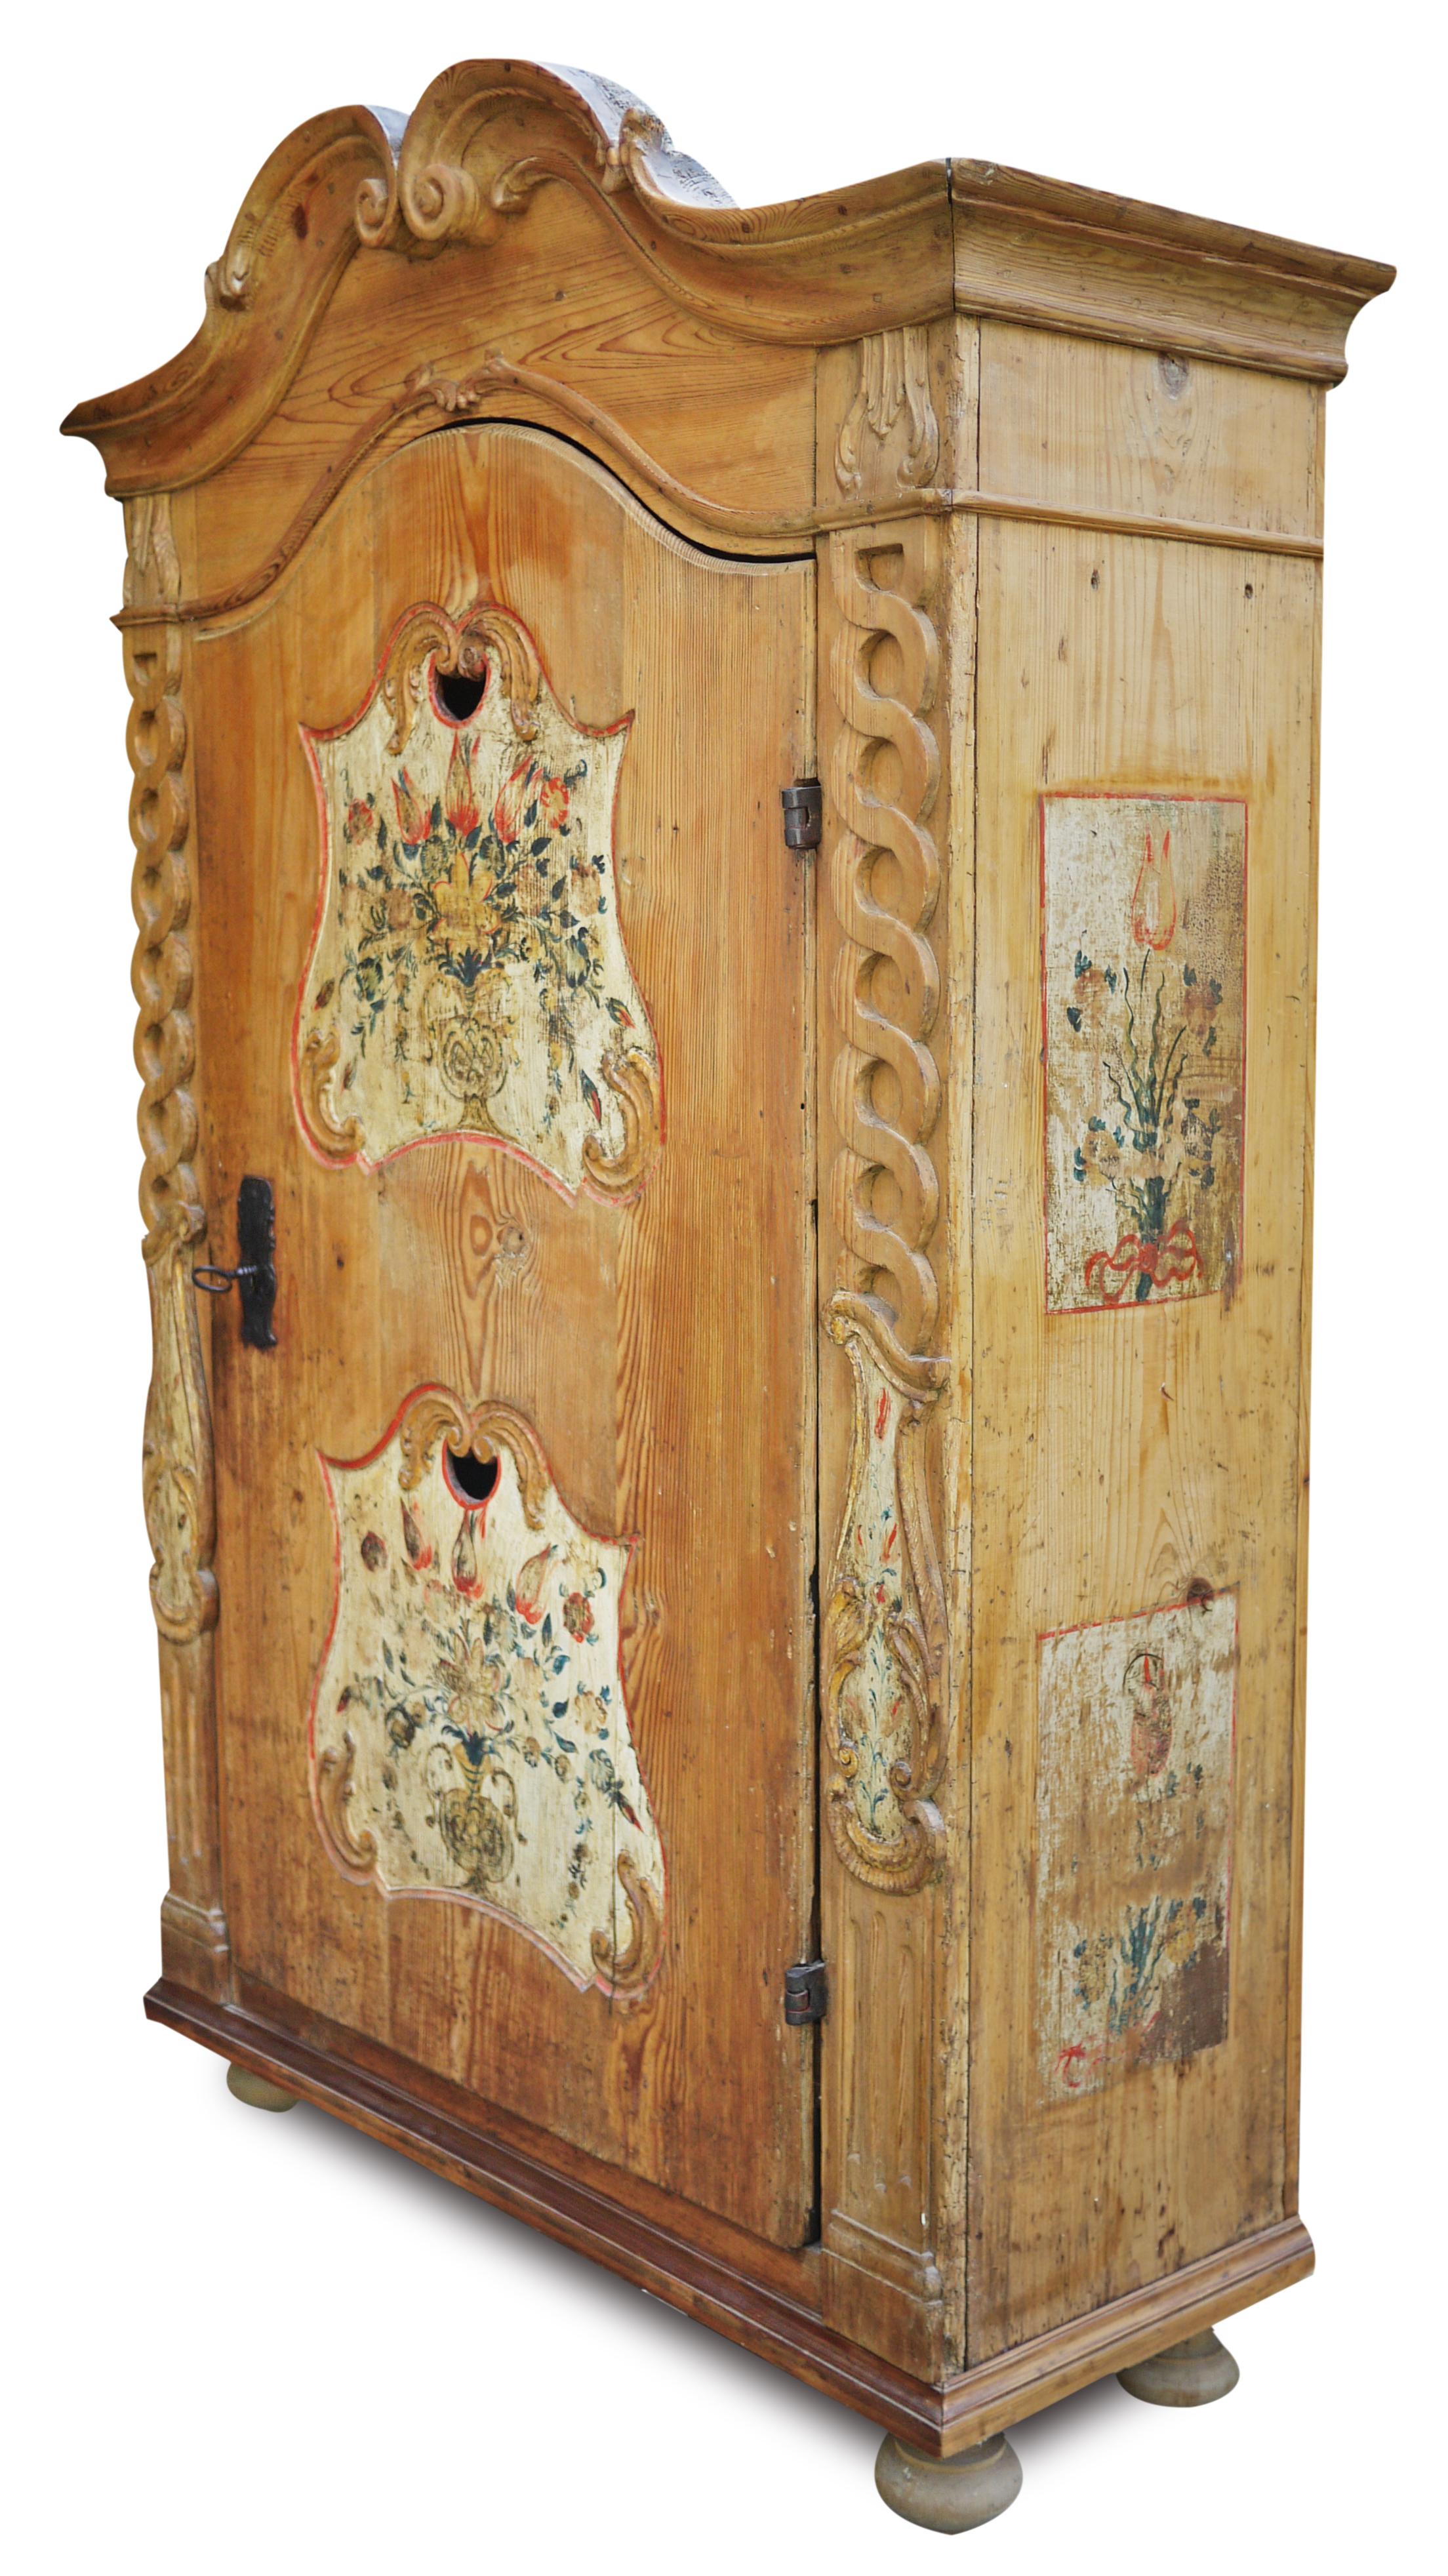 Exceptional Tyrolean Carved Wardrobe
COD: A169
H. 188 cm - L. 112 cm (120cm to the frames) - P. 48 cm (54 to the frames)

Exceptional Tyrolean wardrobe with one door, in fir wood.
The entire surface is characterized by rich and refined carvings in